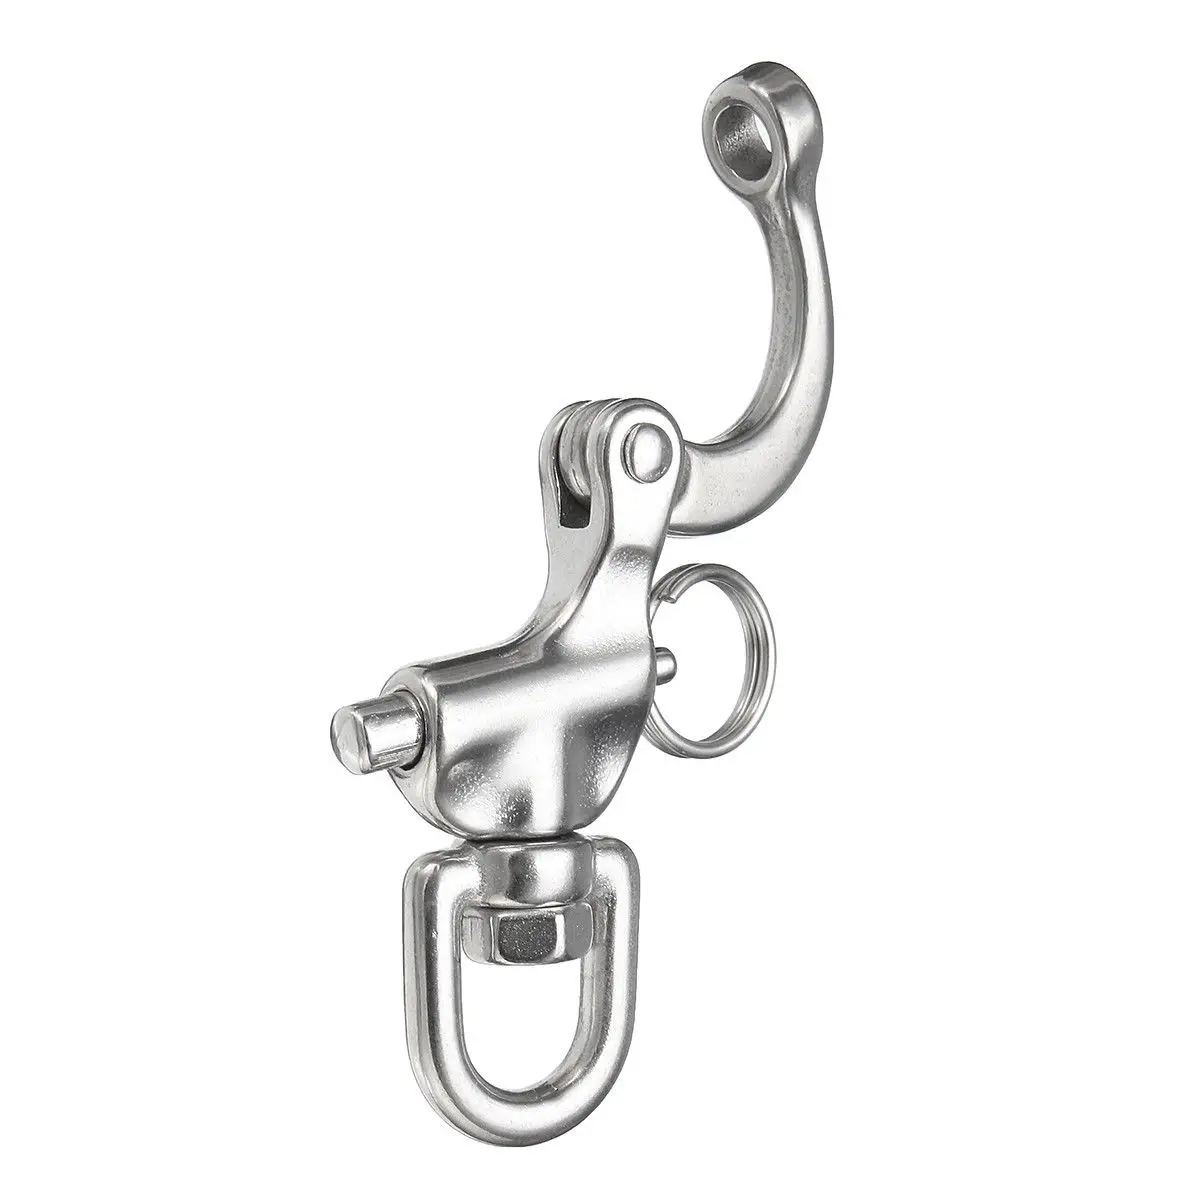 Mayitr 316 Stainless Steel Swivel Shackle Quick Release Boat Anchor Chain Eye Shackle Swivel Snap Hook for Marine Architectural